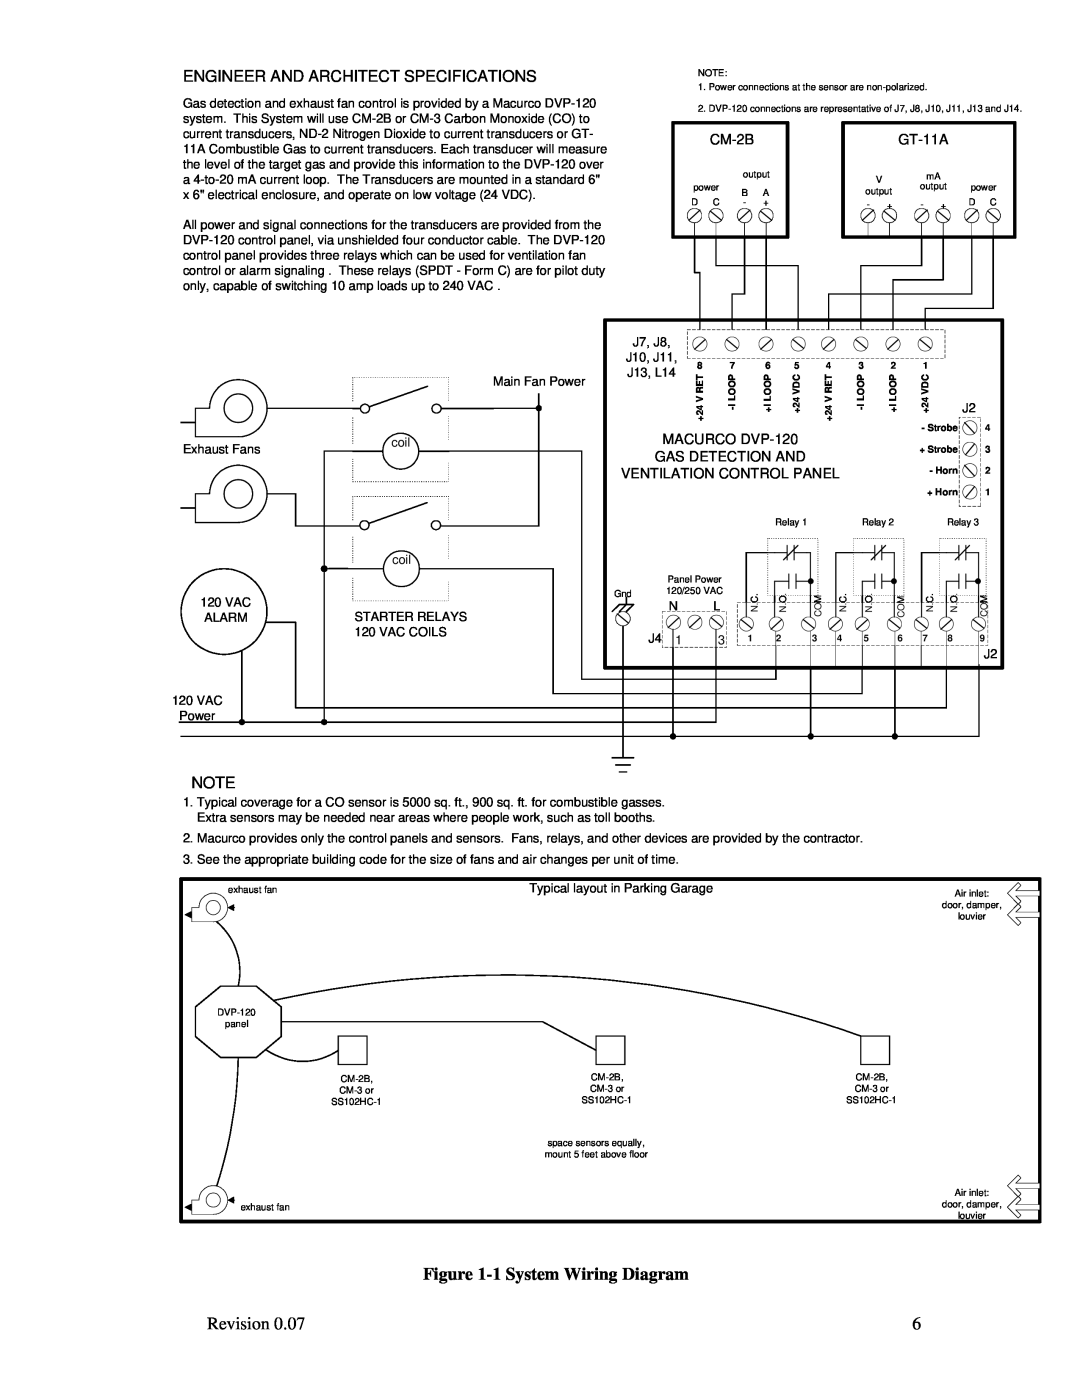 Macurco 1System Wiring Diagram, Engineer And Architect Specifications, MACURCO DVP-120, Gas Detection And, Exhaust Fans 